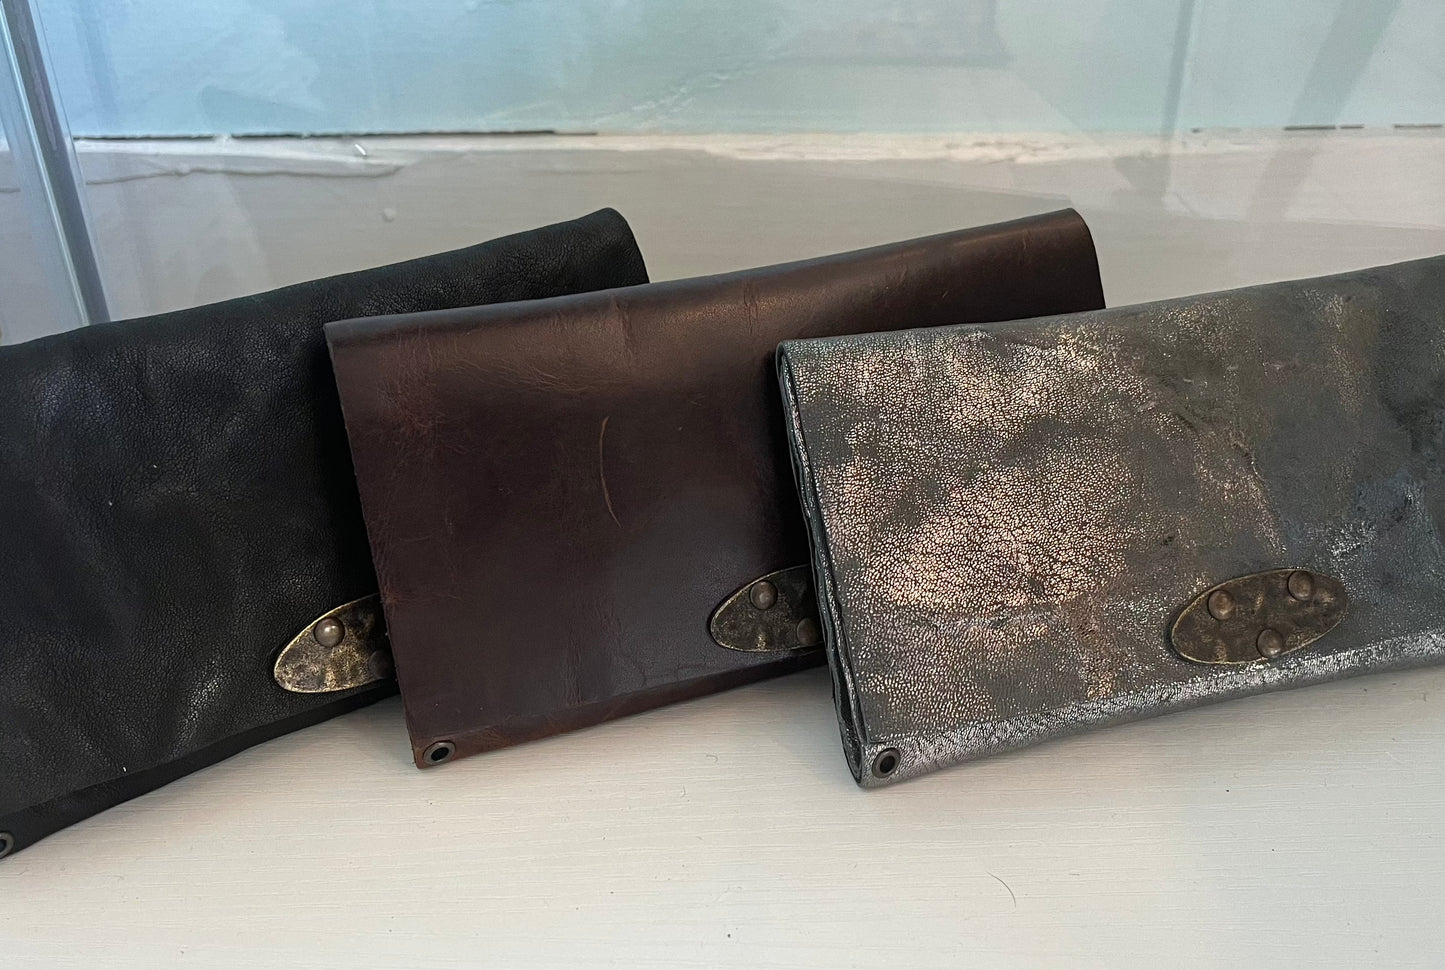 Unconstructed Leather Wallet Clutch